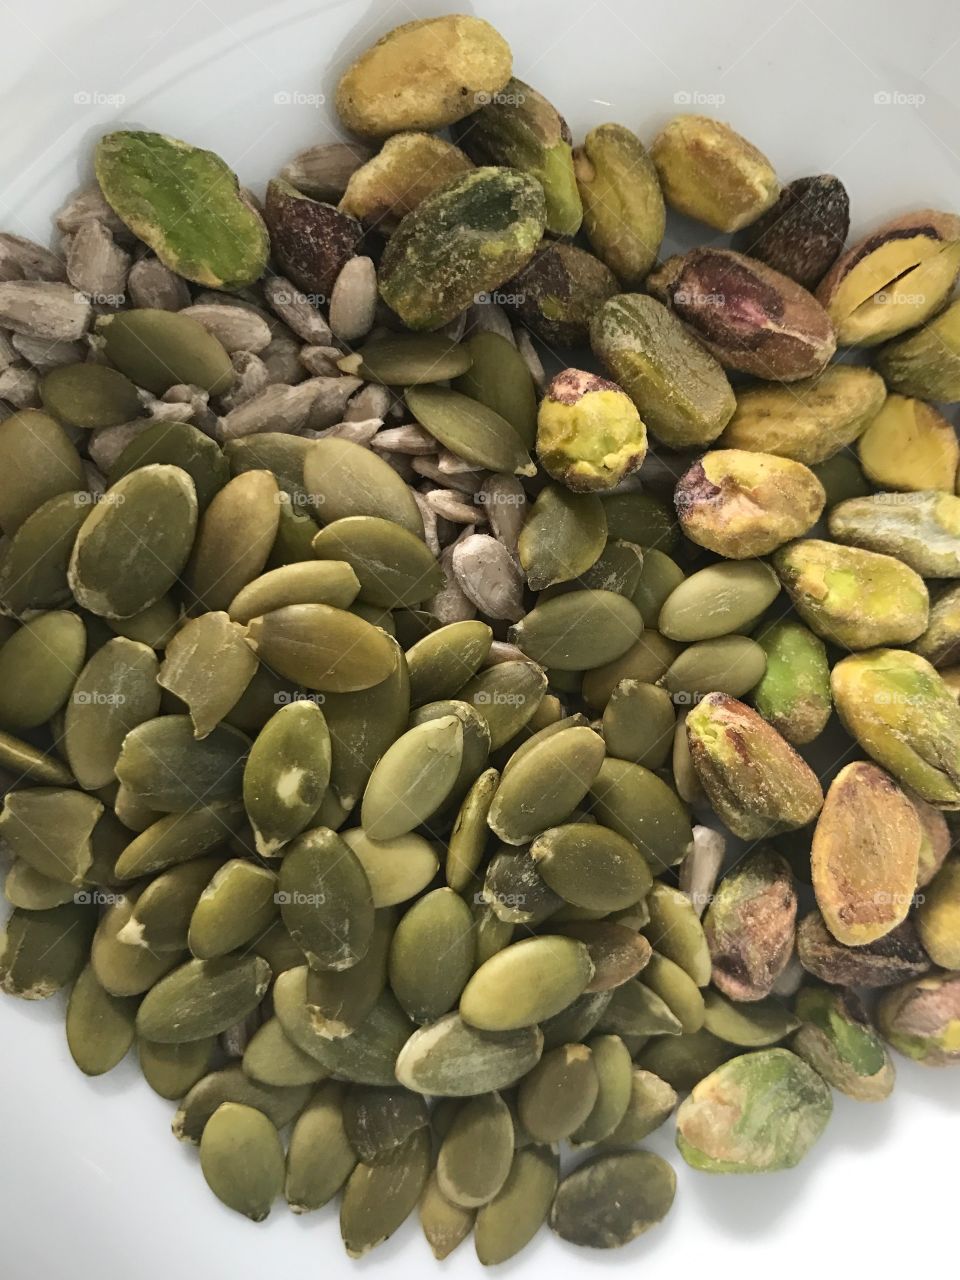 Seeds and nuts-close-up